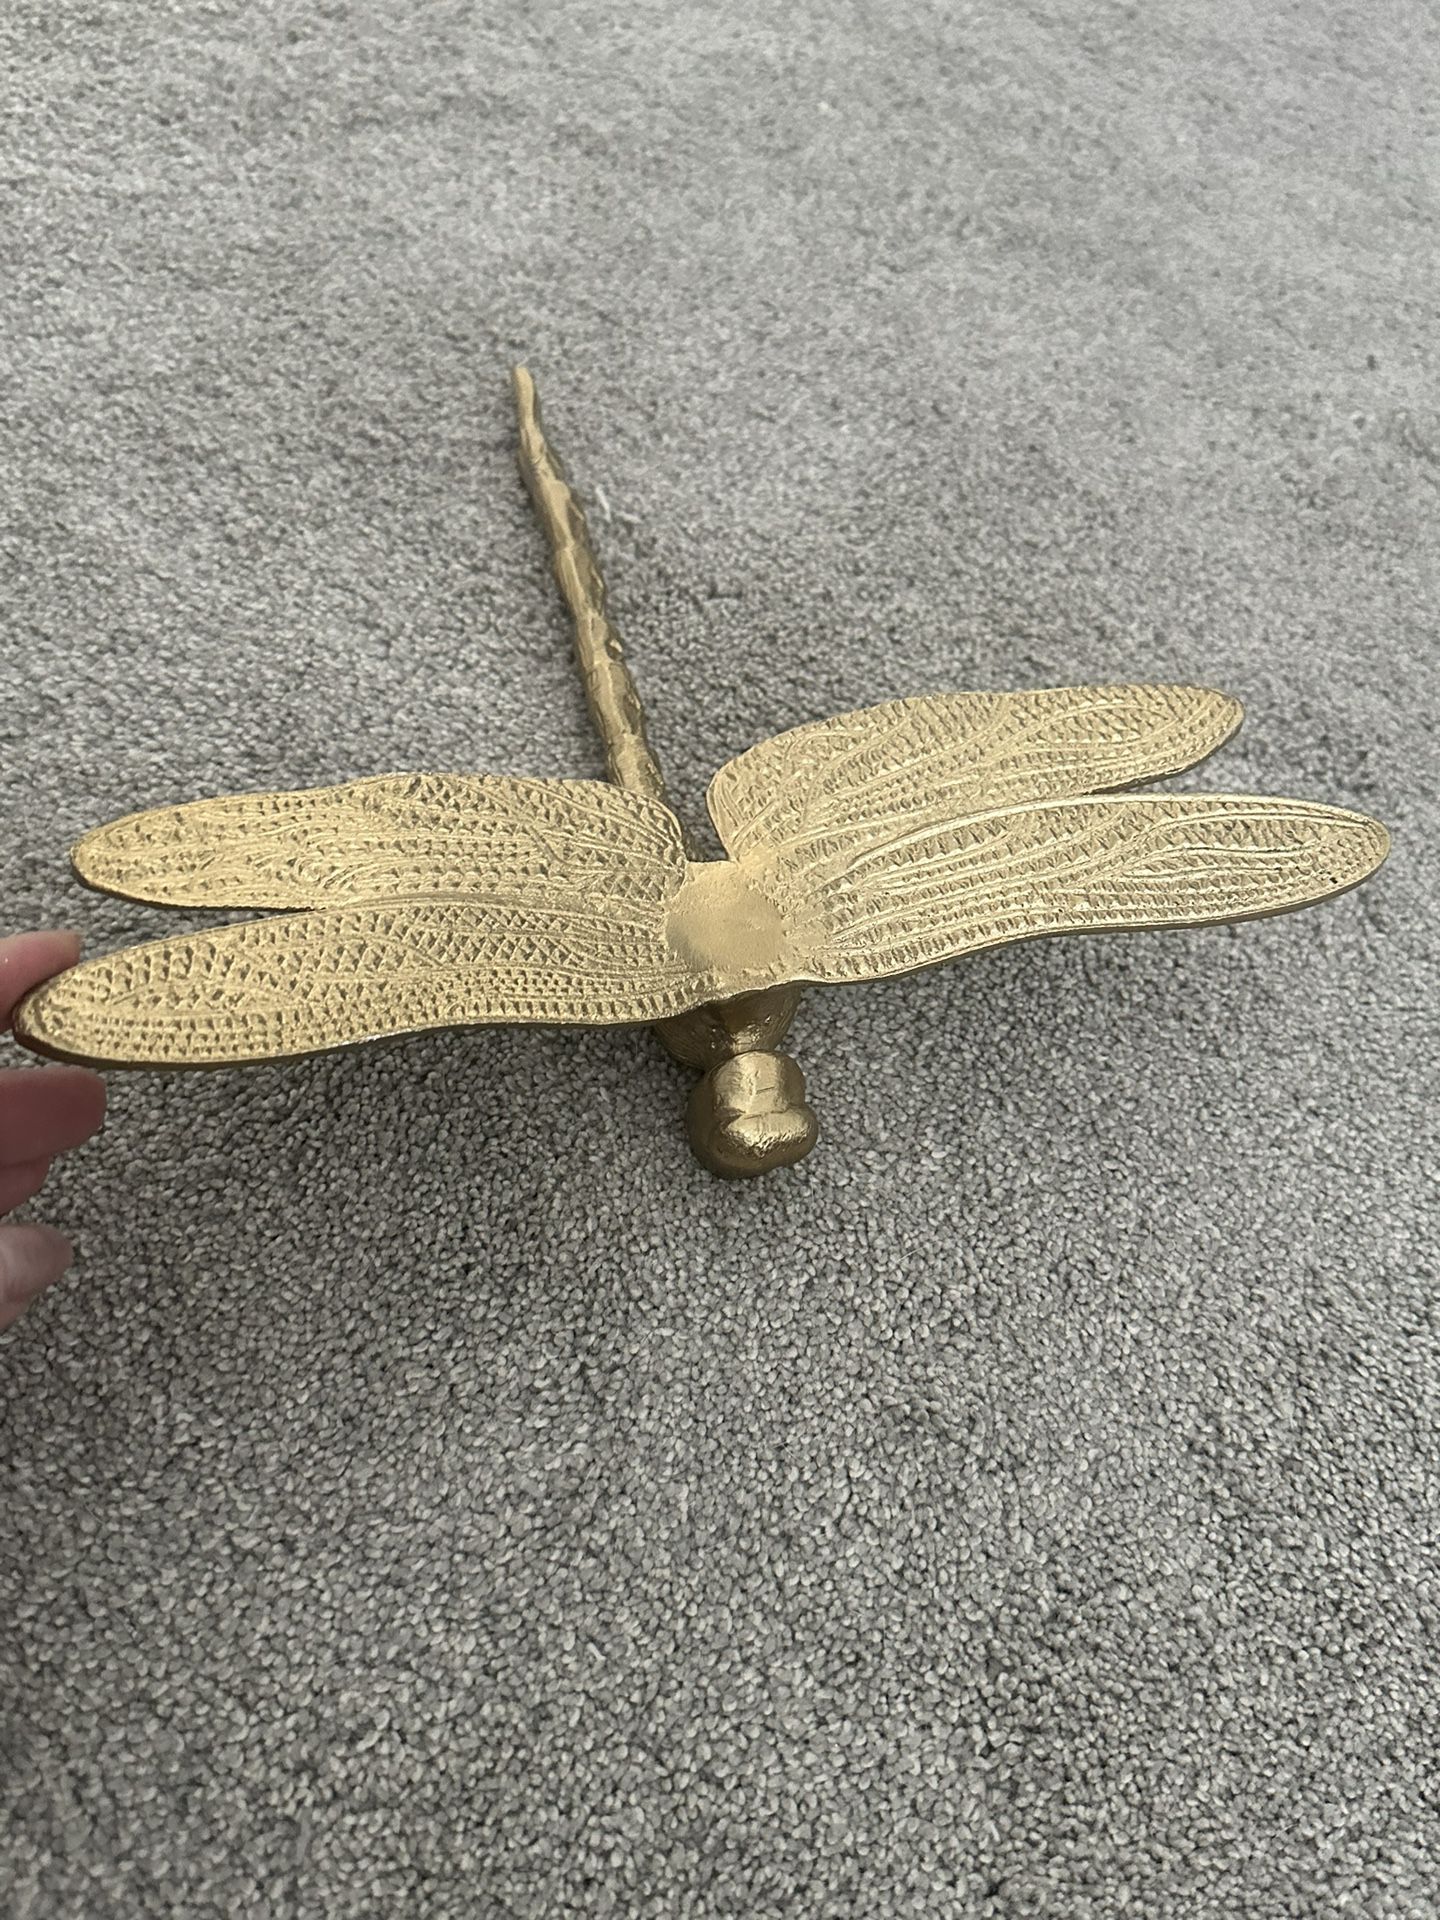 Dragonfly Statue 